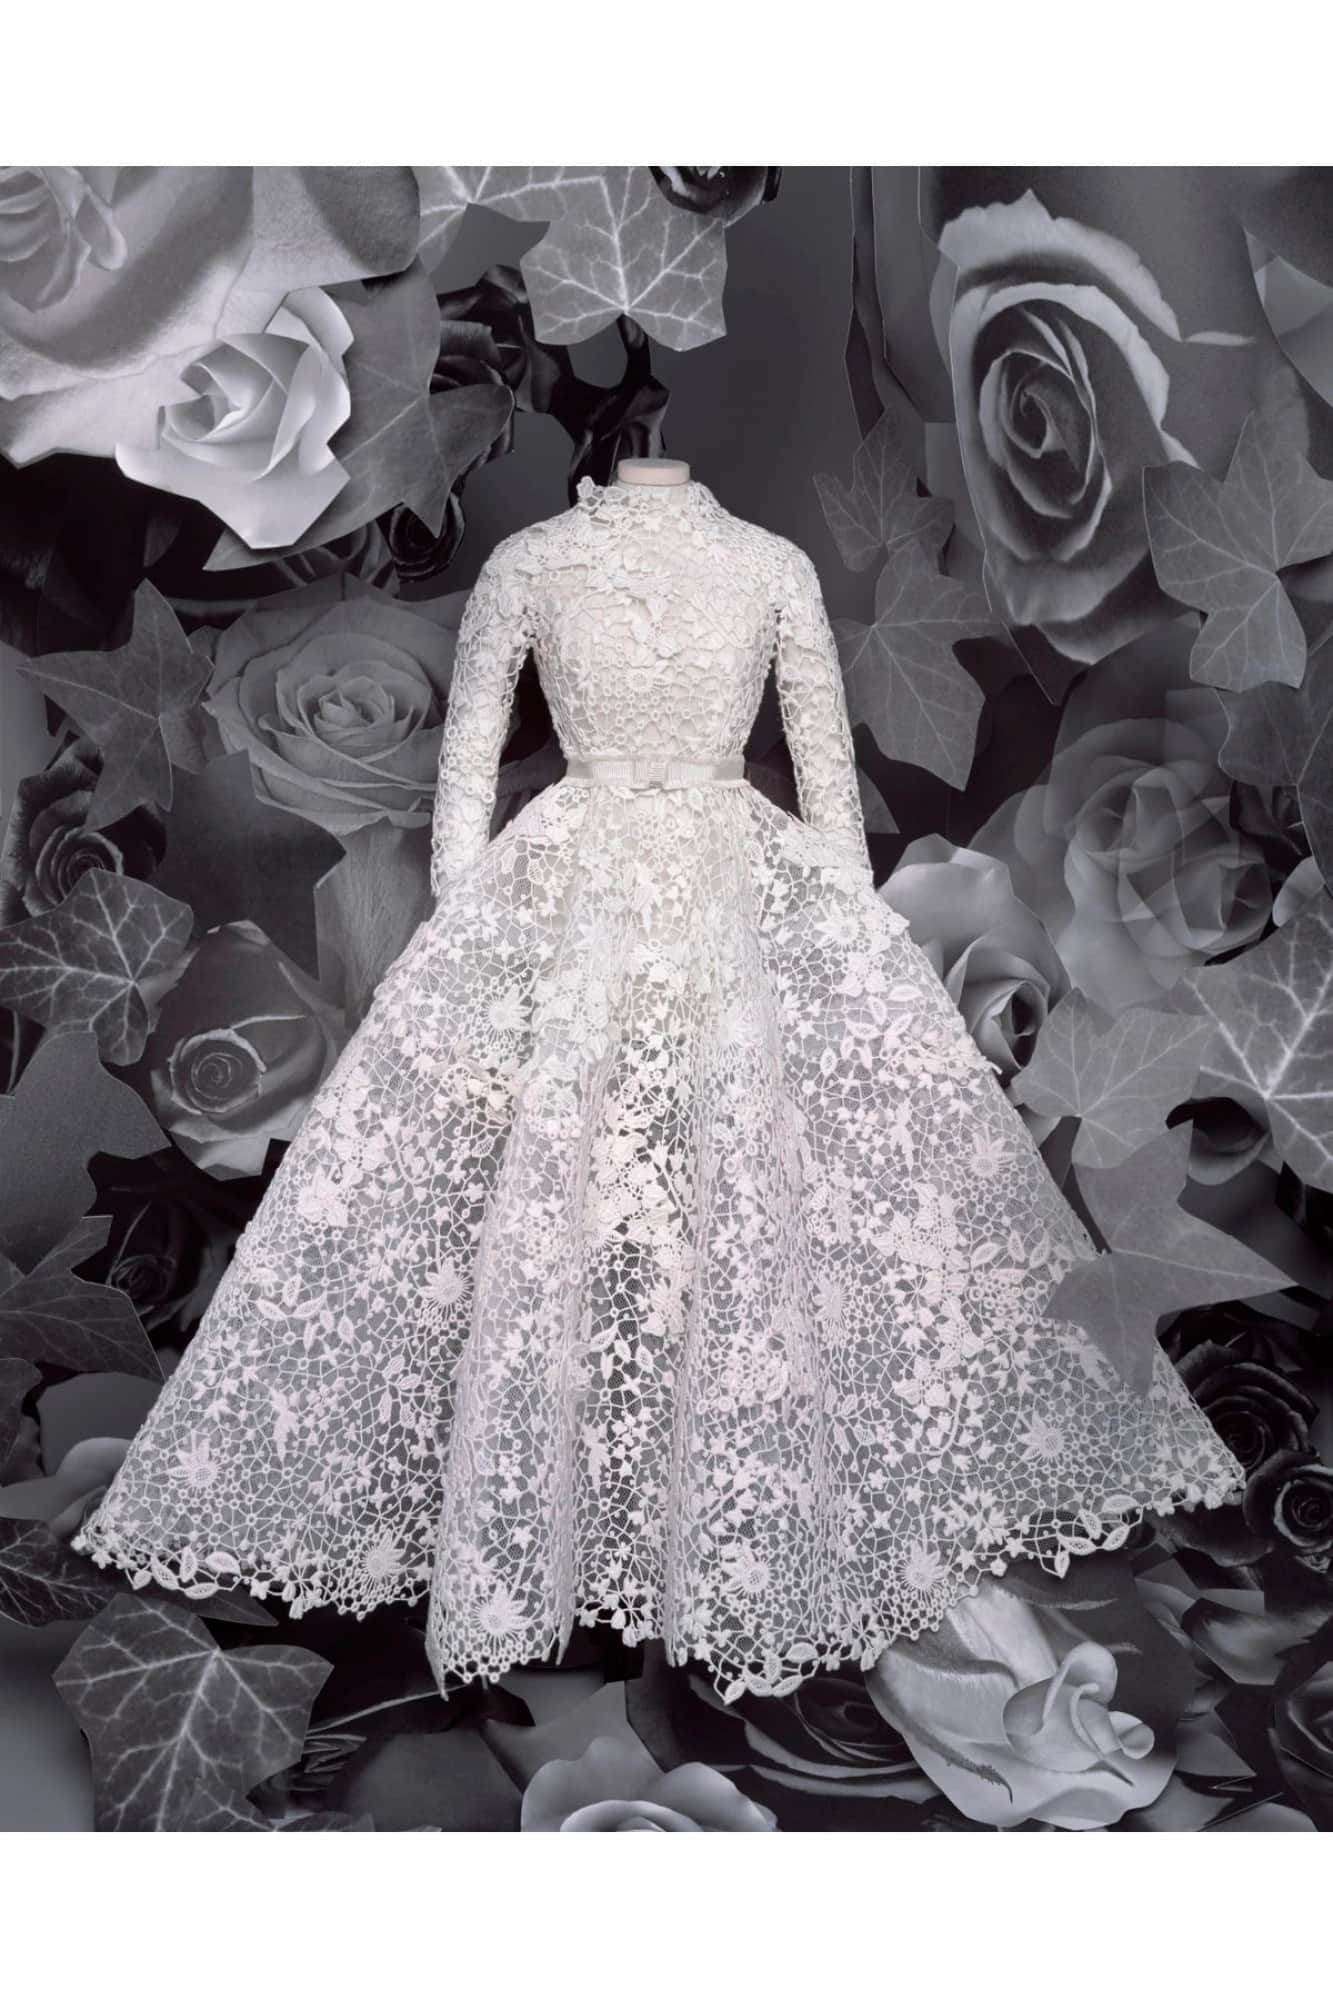 Christian Dior Haute Couture Fall-Winter 2020-2021 - RUNWAY MAGAZINE ®  Collections